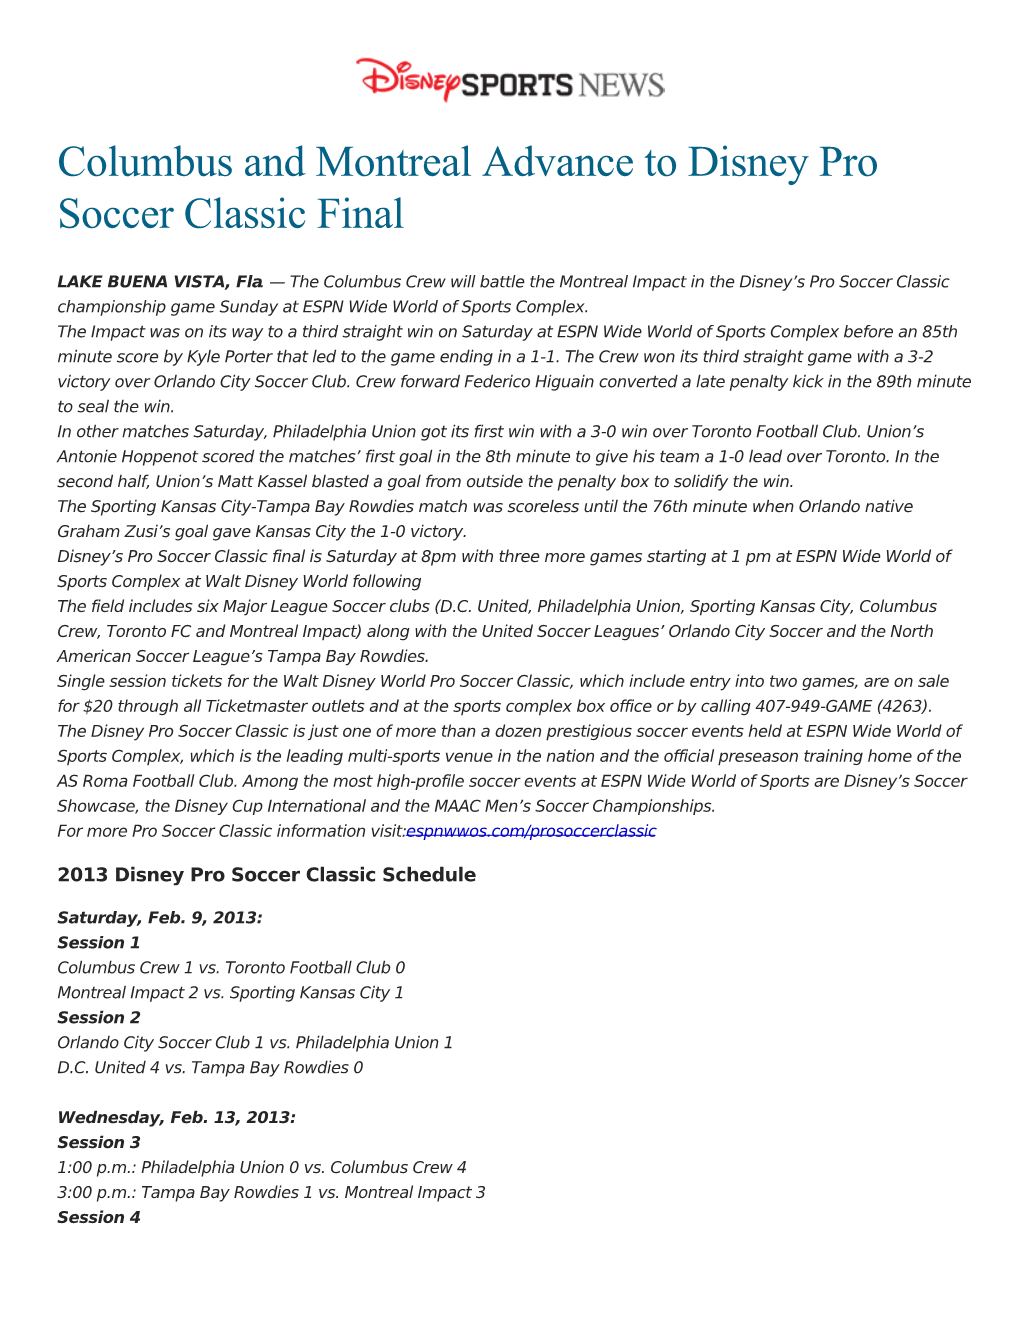 Columbus and Montreal Advance to Disney Pro Soccer Classic Final